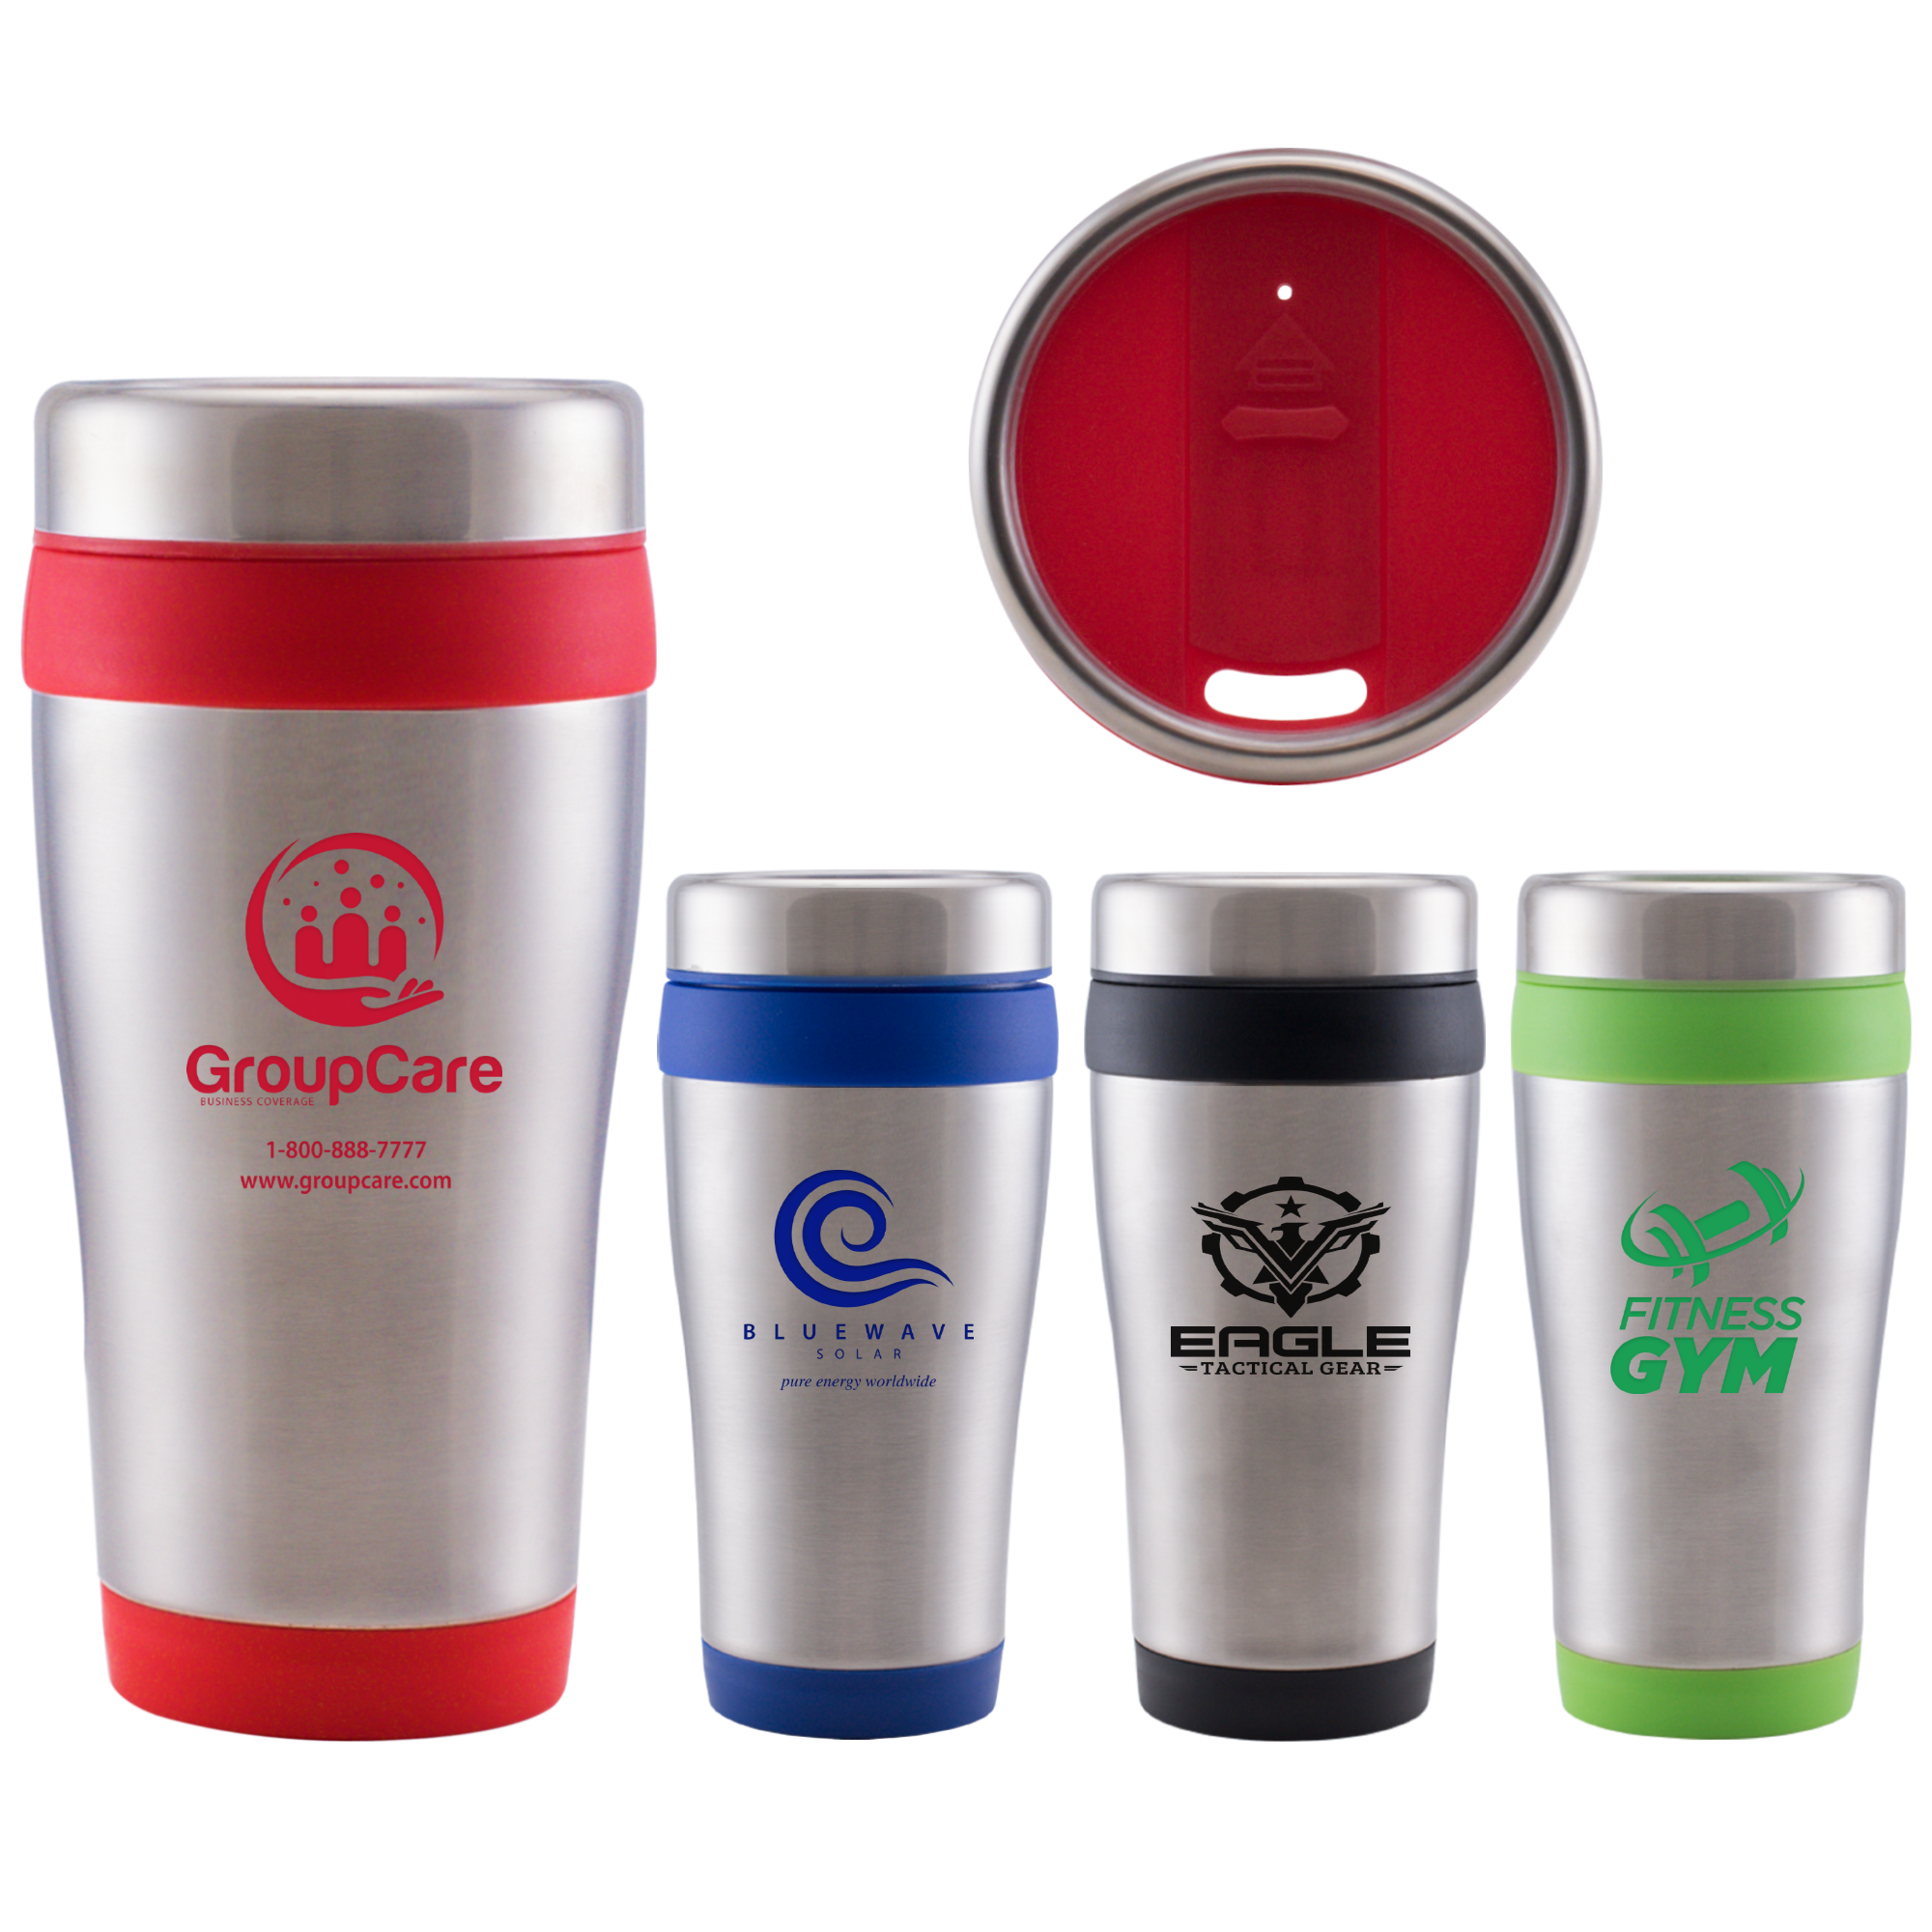 Solo Cup Style Single Wall Promotional Tumbler - 16 oz.